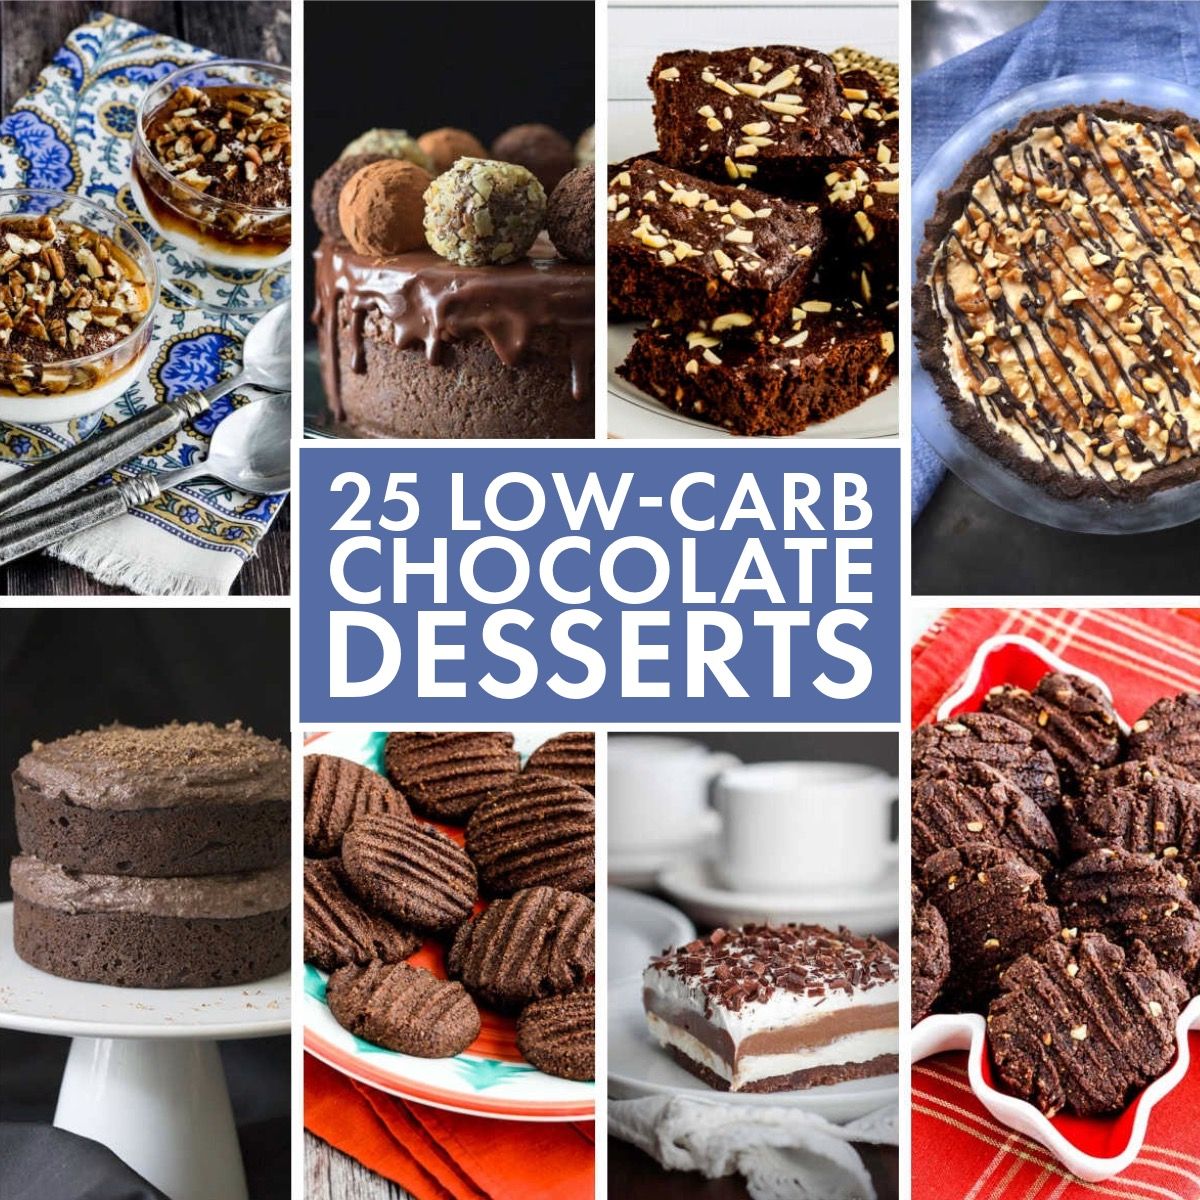 25 Low-Carb Chocolate Desserts collage showing featured recipes.